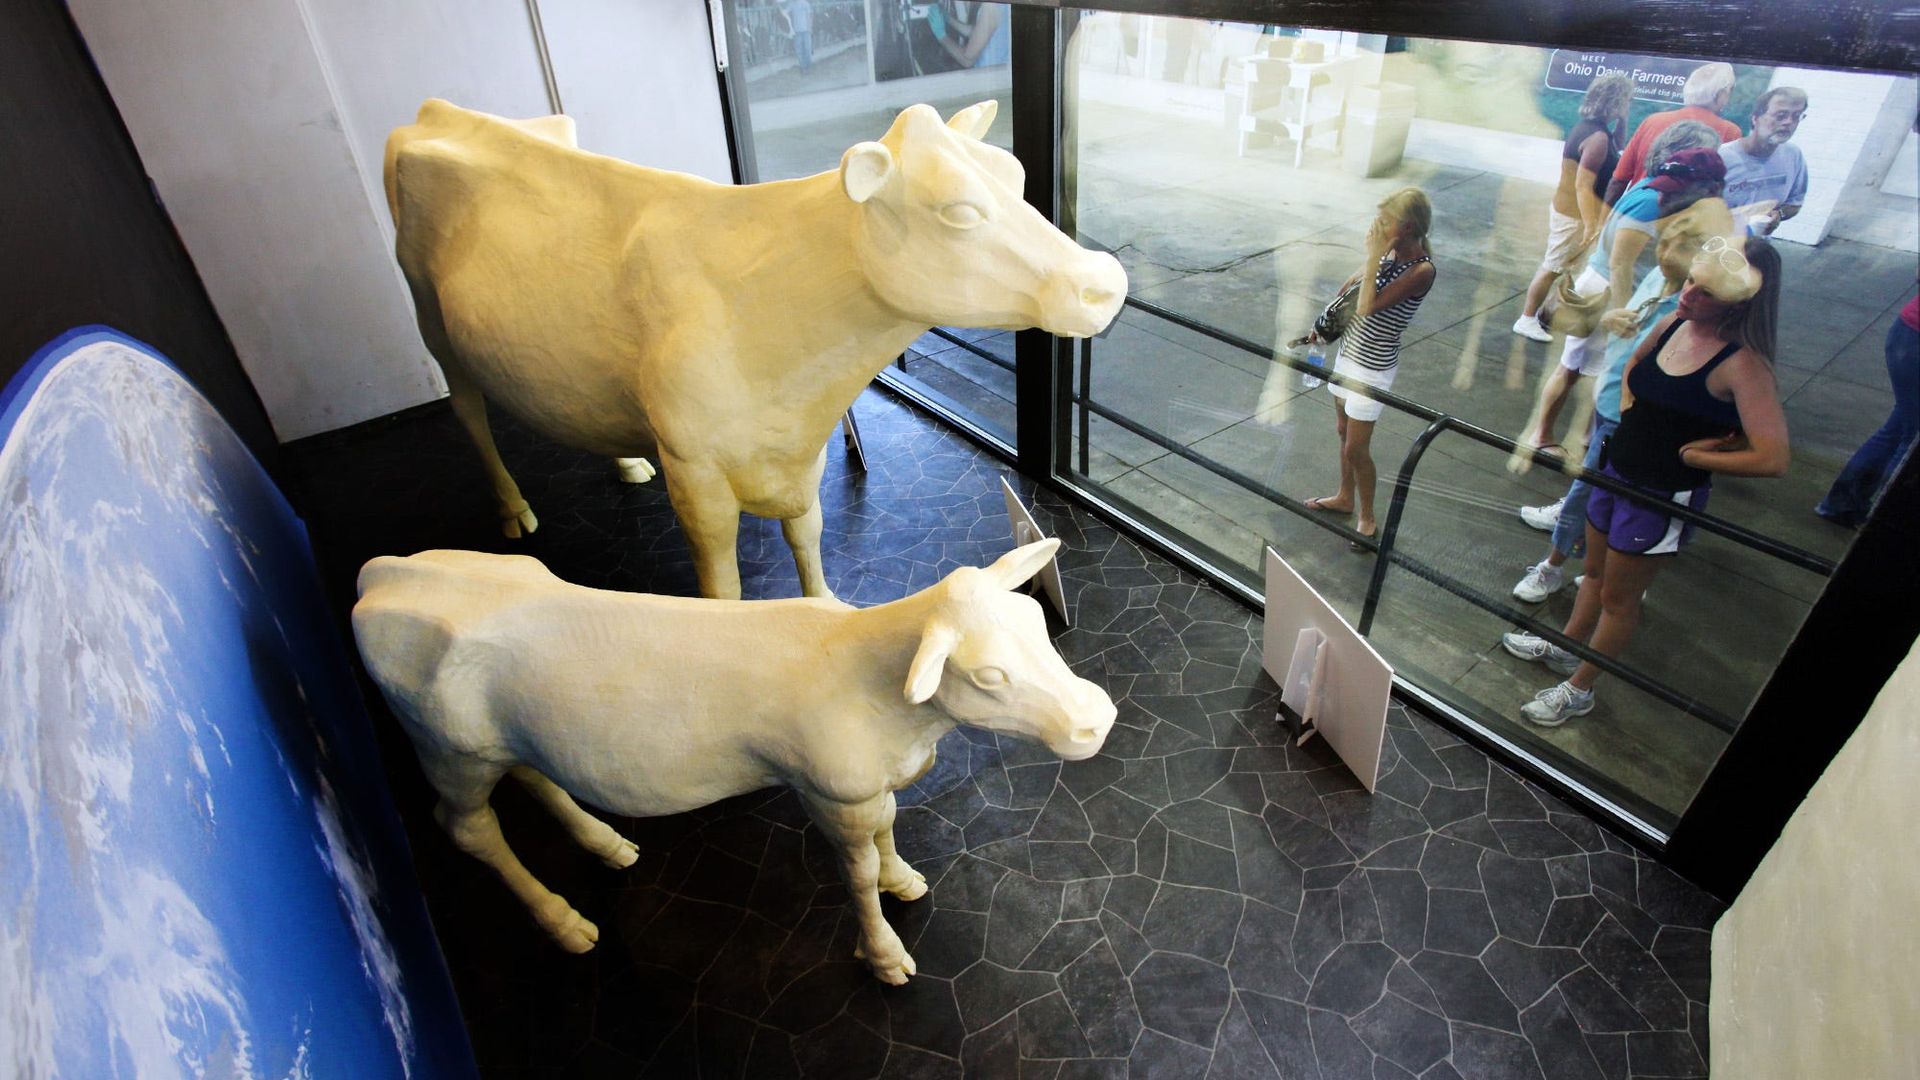 Ohio State Fair guests look at butter cow and butter calf sculptures